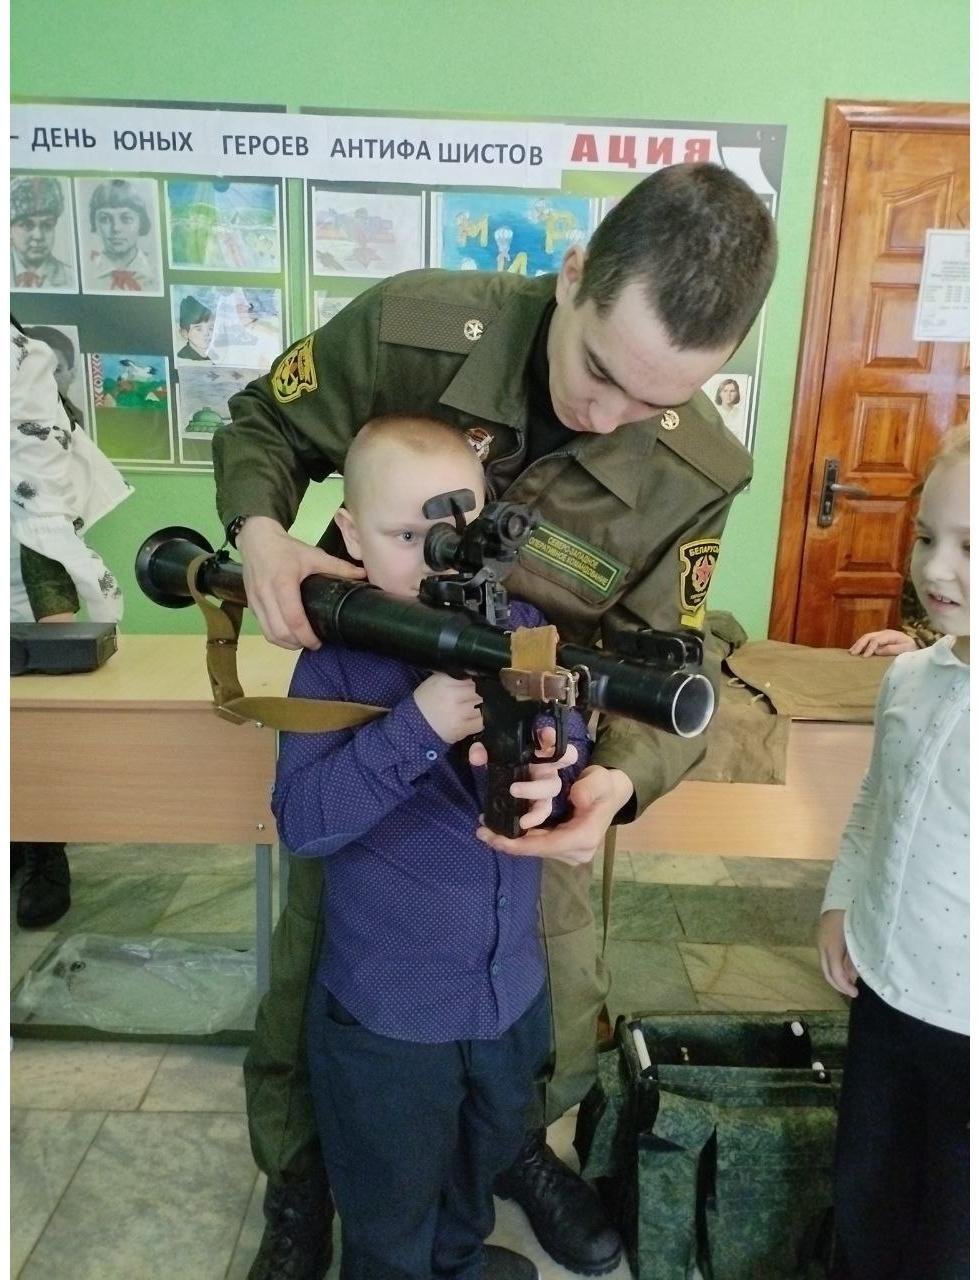 The 19th Guards Mechanized Brigade teaches six-year-old "anti-fascists" how to use grenade launchers